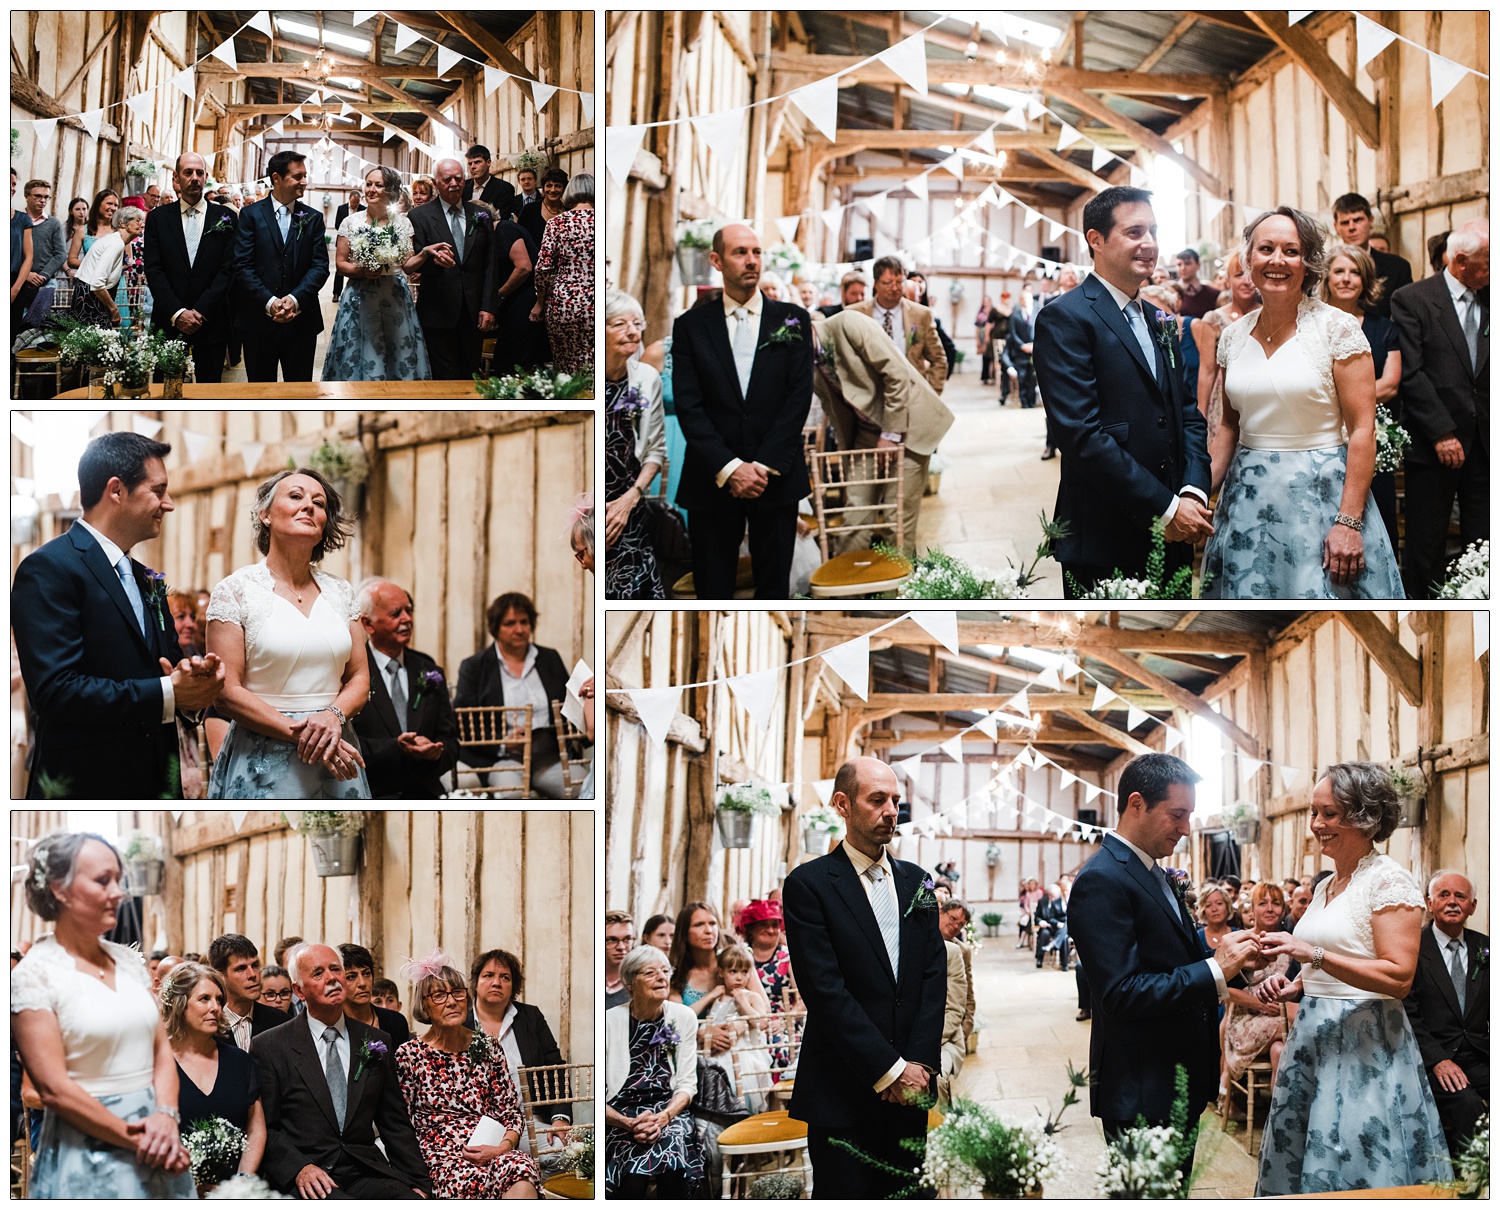 Bride and groom take their vows in the West barn at Alpheton Hall Barns.